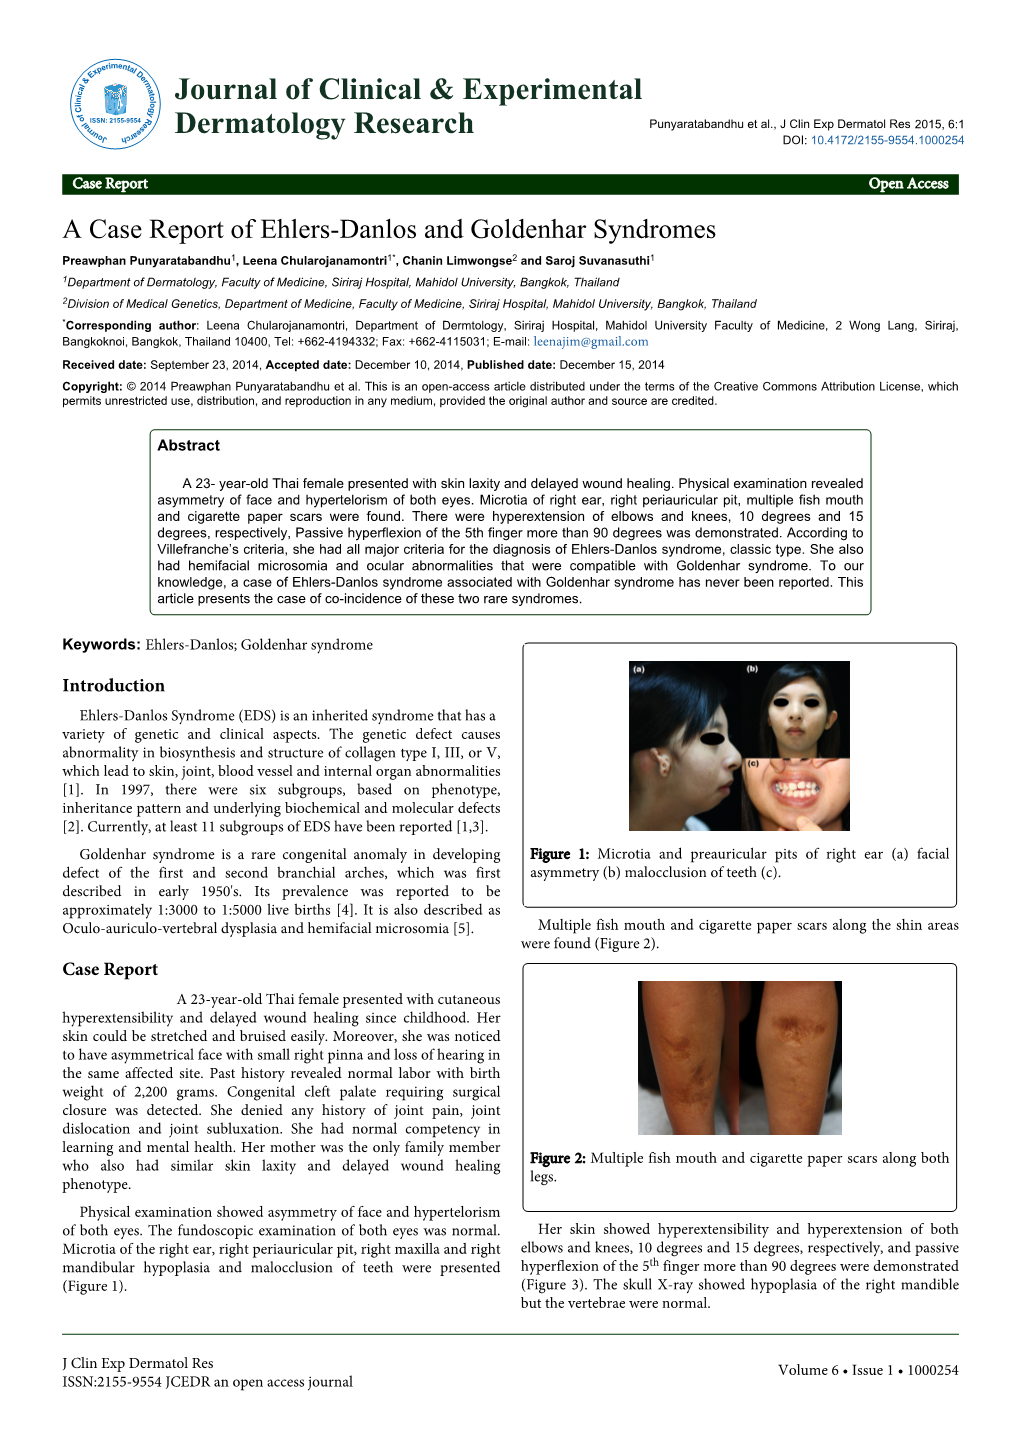 A Case Report of Ehlers-Danlos and Goldenhar Syndromes